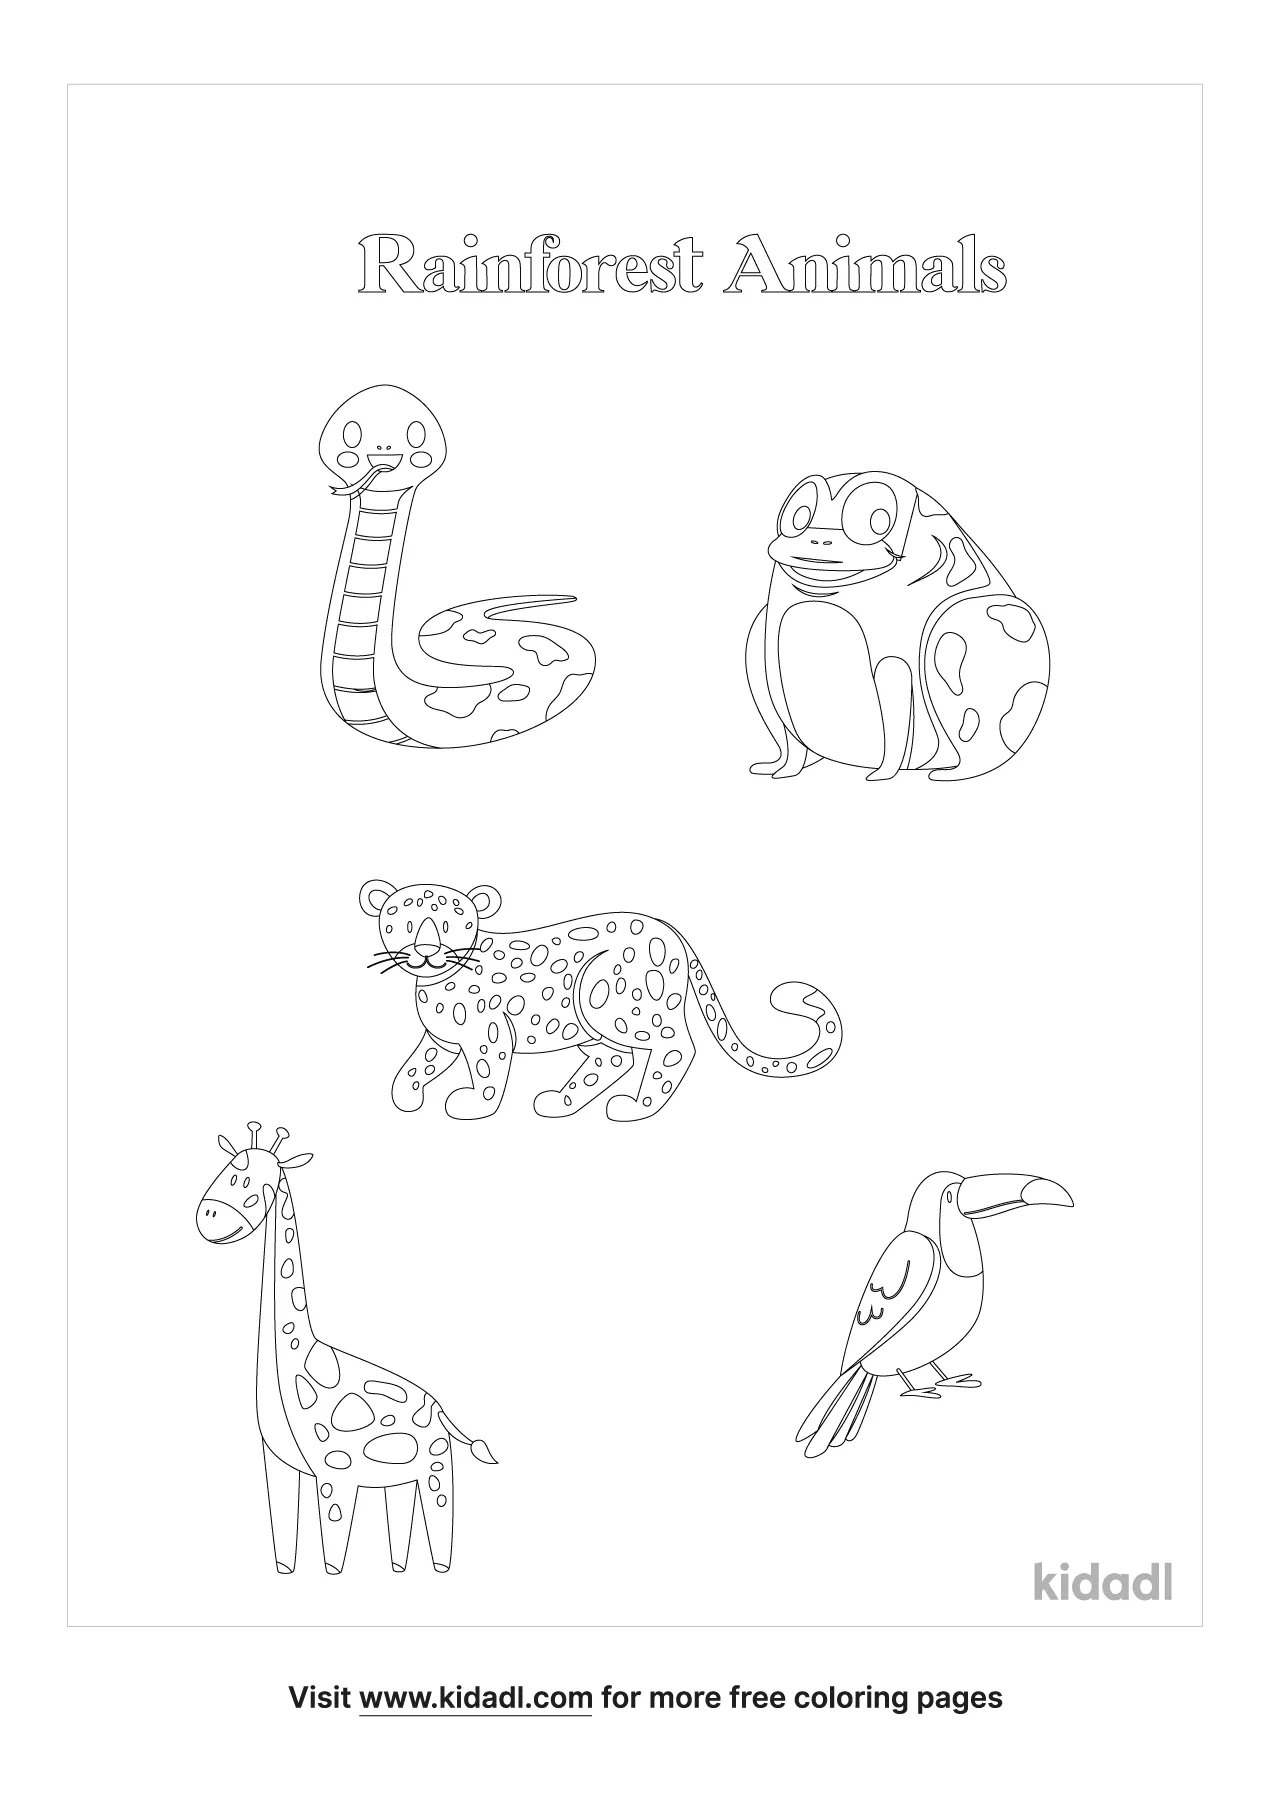 Free Rainforest Animals Coloring Page | Coloring Page Printables | Kidadl